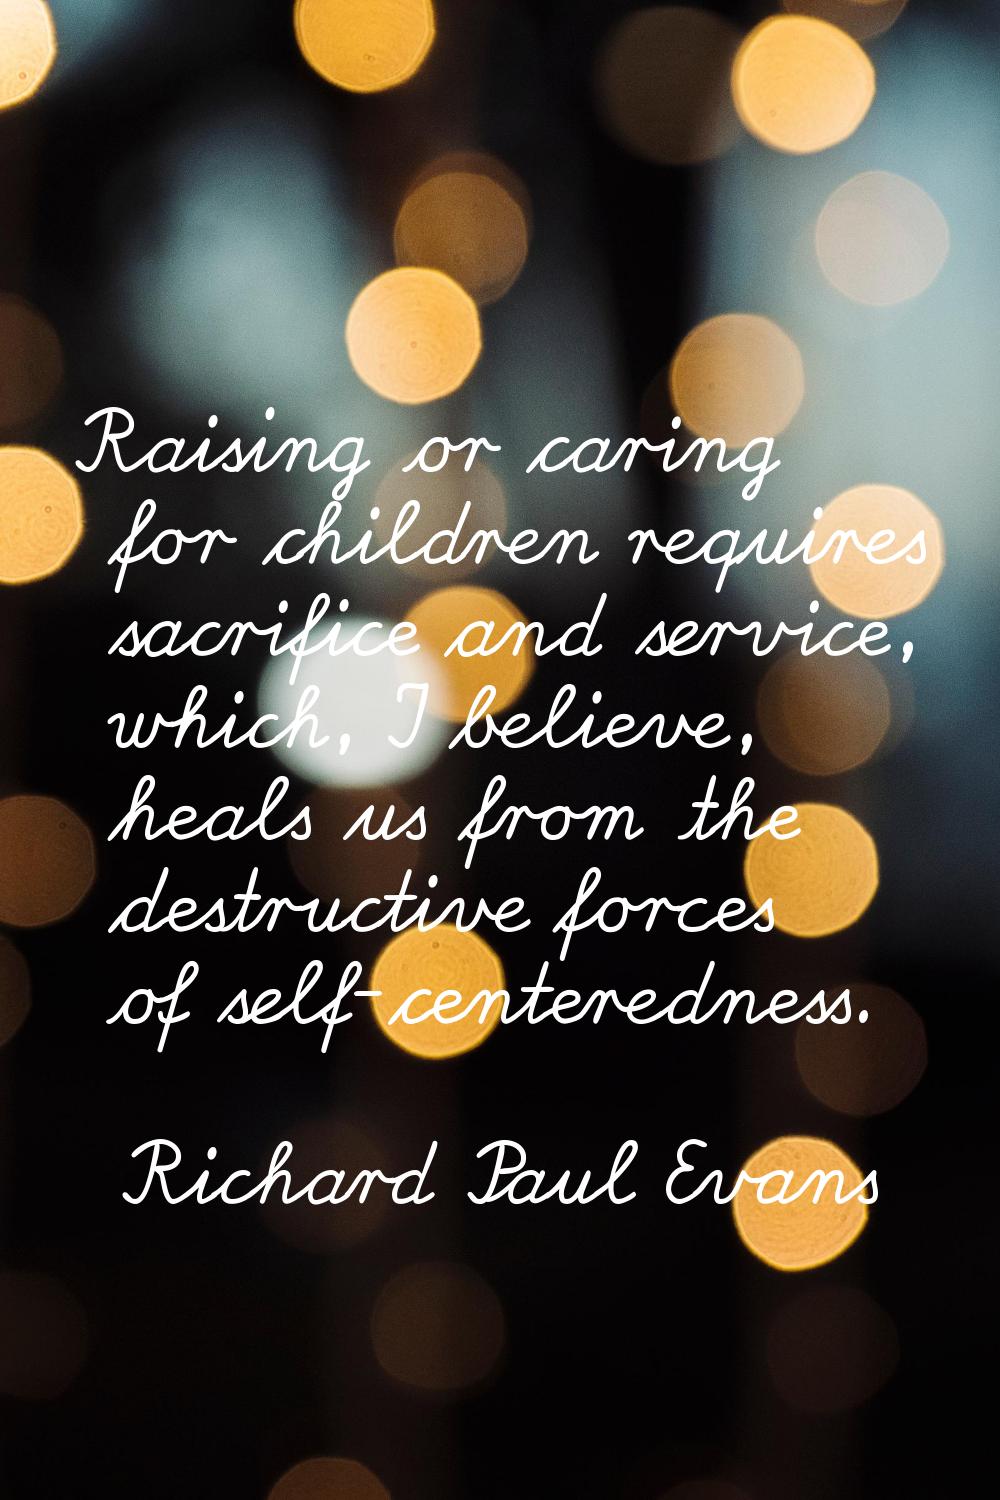 Raising or caring for children requires sacrifice and service, which, I believe, heals us from the 